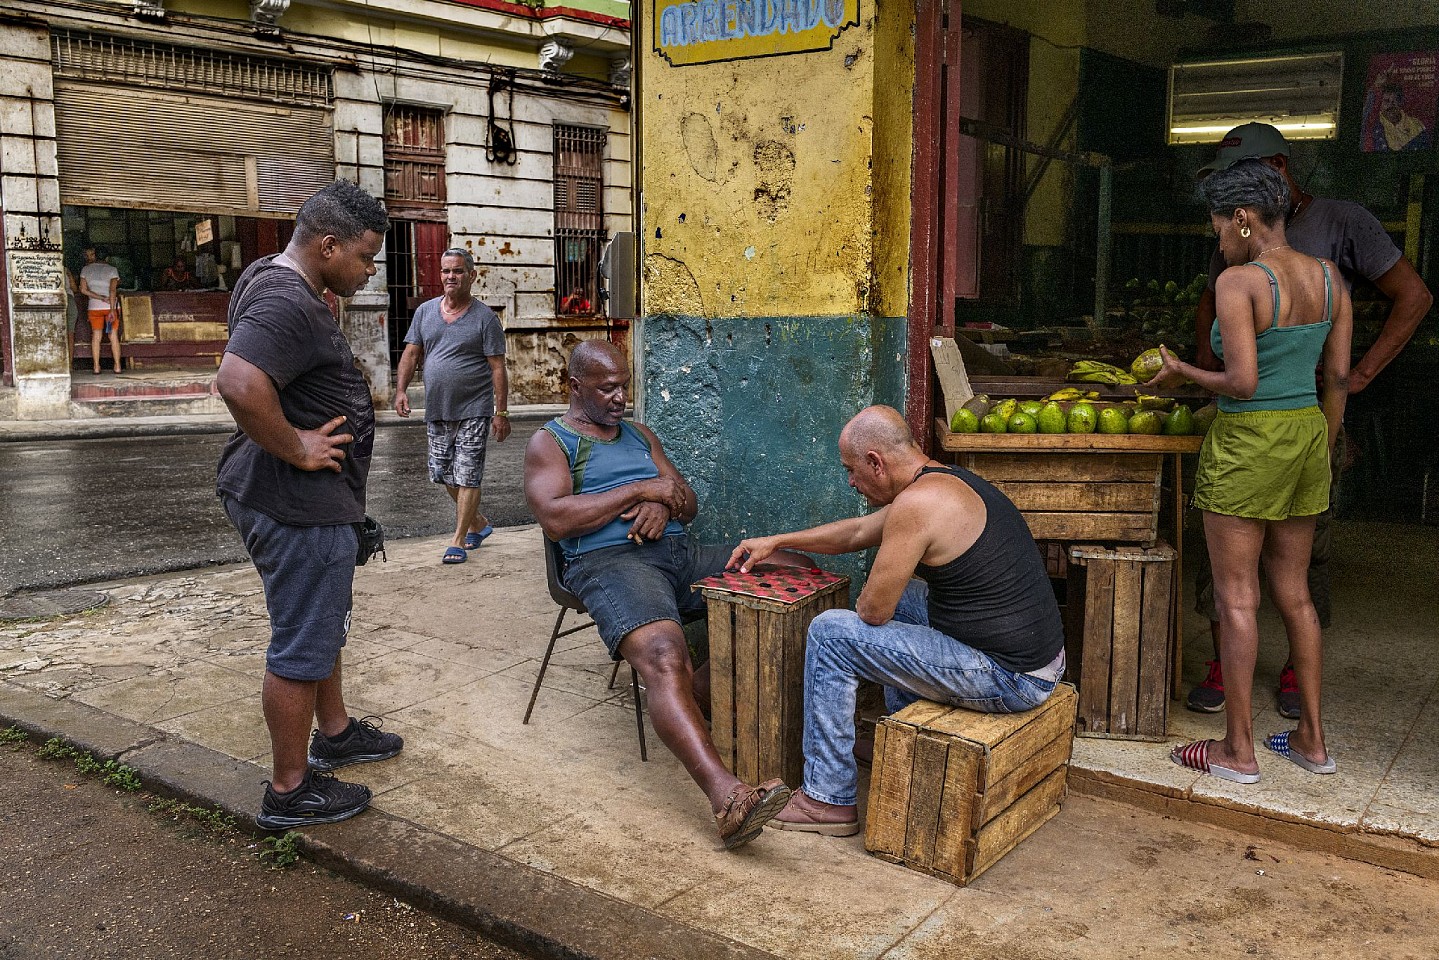 Steve McCurry, Men Play Checkers in Havana, 2019
FujiFlex Crystal Archive Print
Price/Size on request